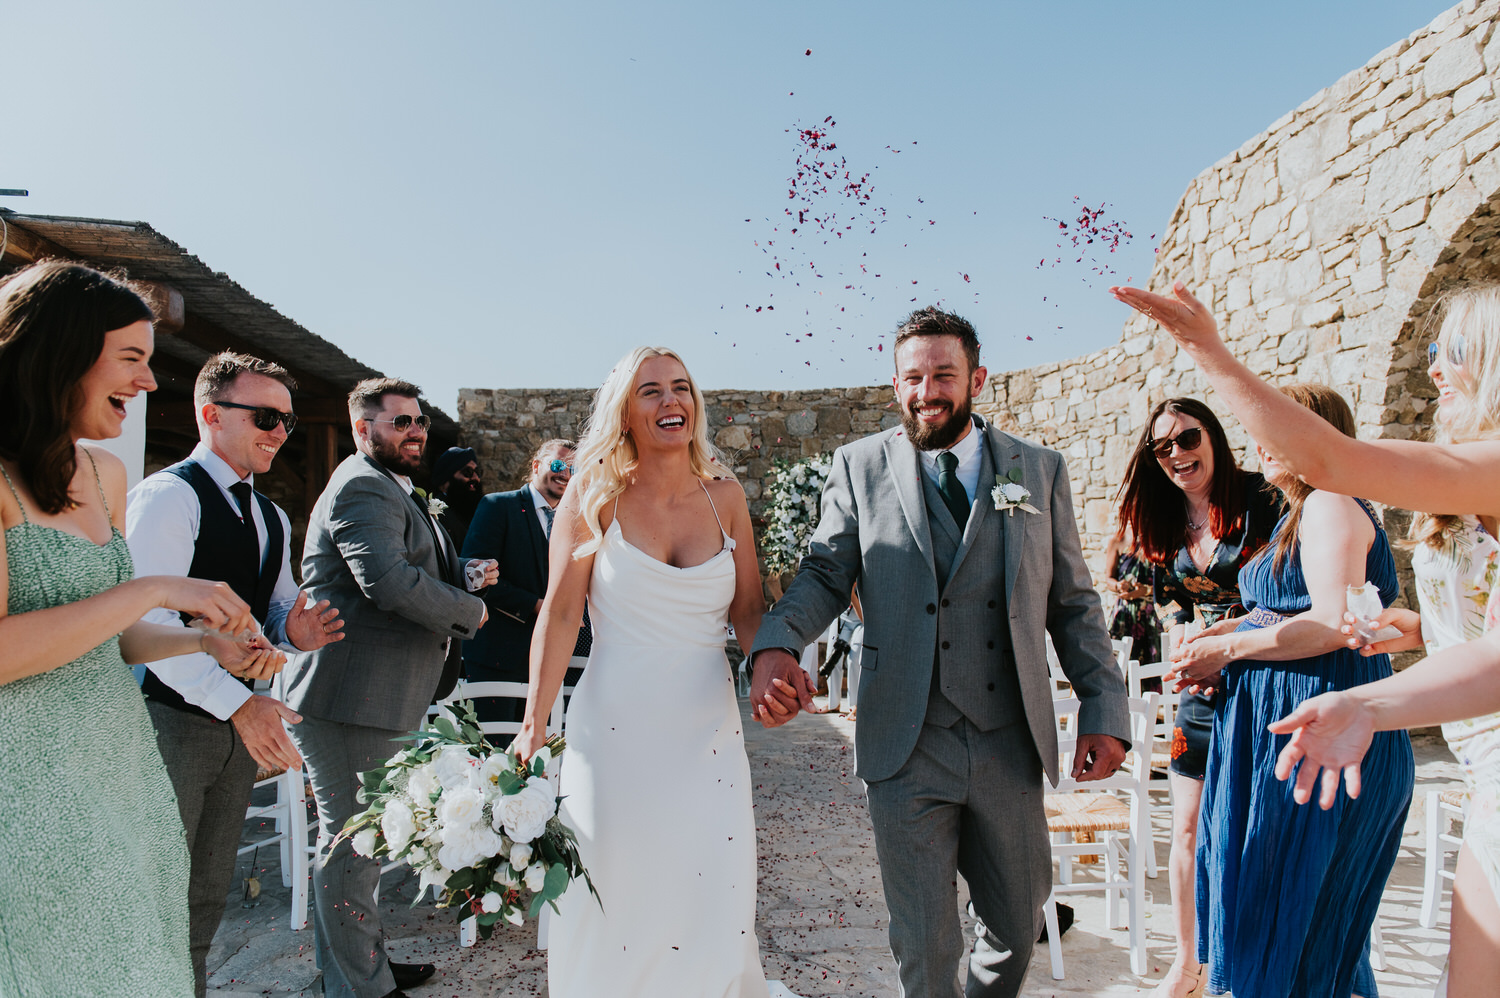 Mykonos wedding photographer: bride and groom exiting the aisle holding hands and laughing showered in dry petals by friends around them.